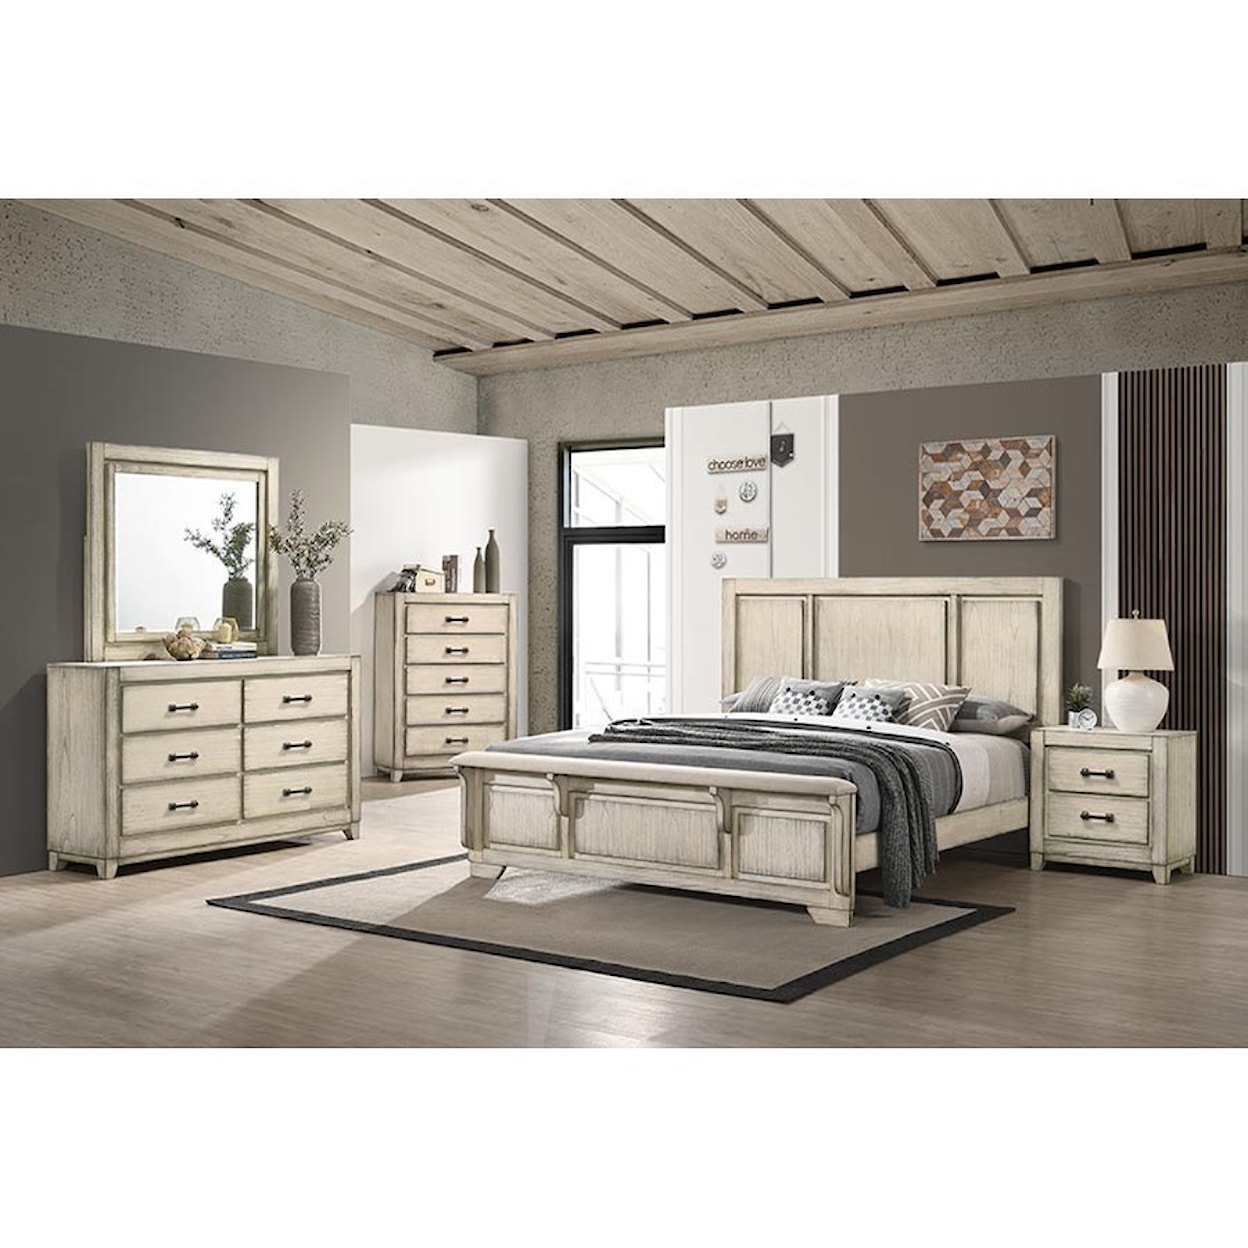 New Classic Ashland 7PC King Bedroom Group